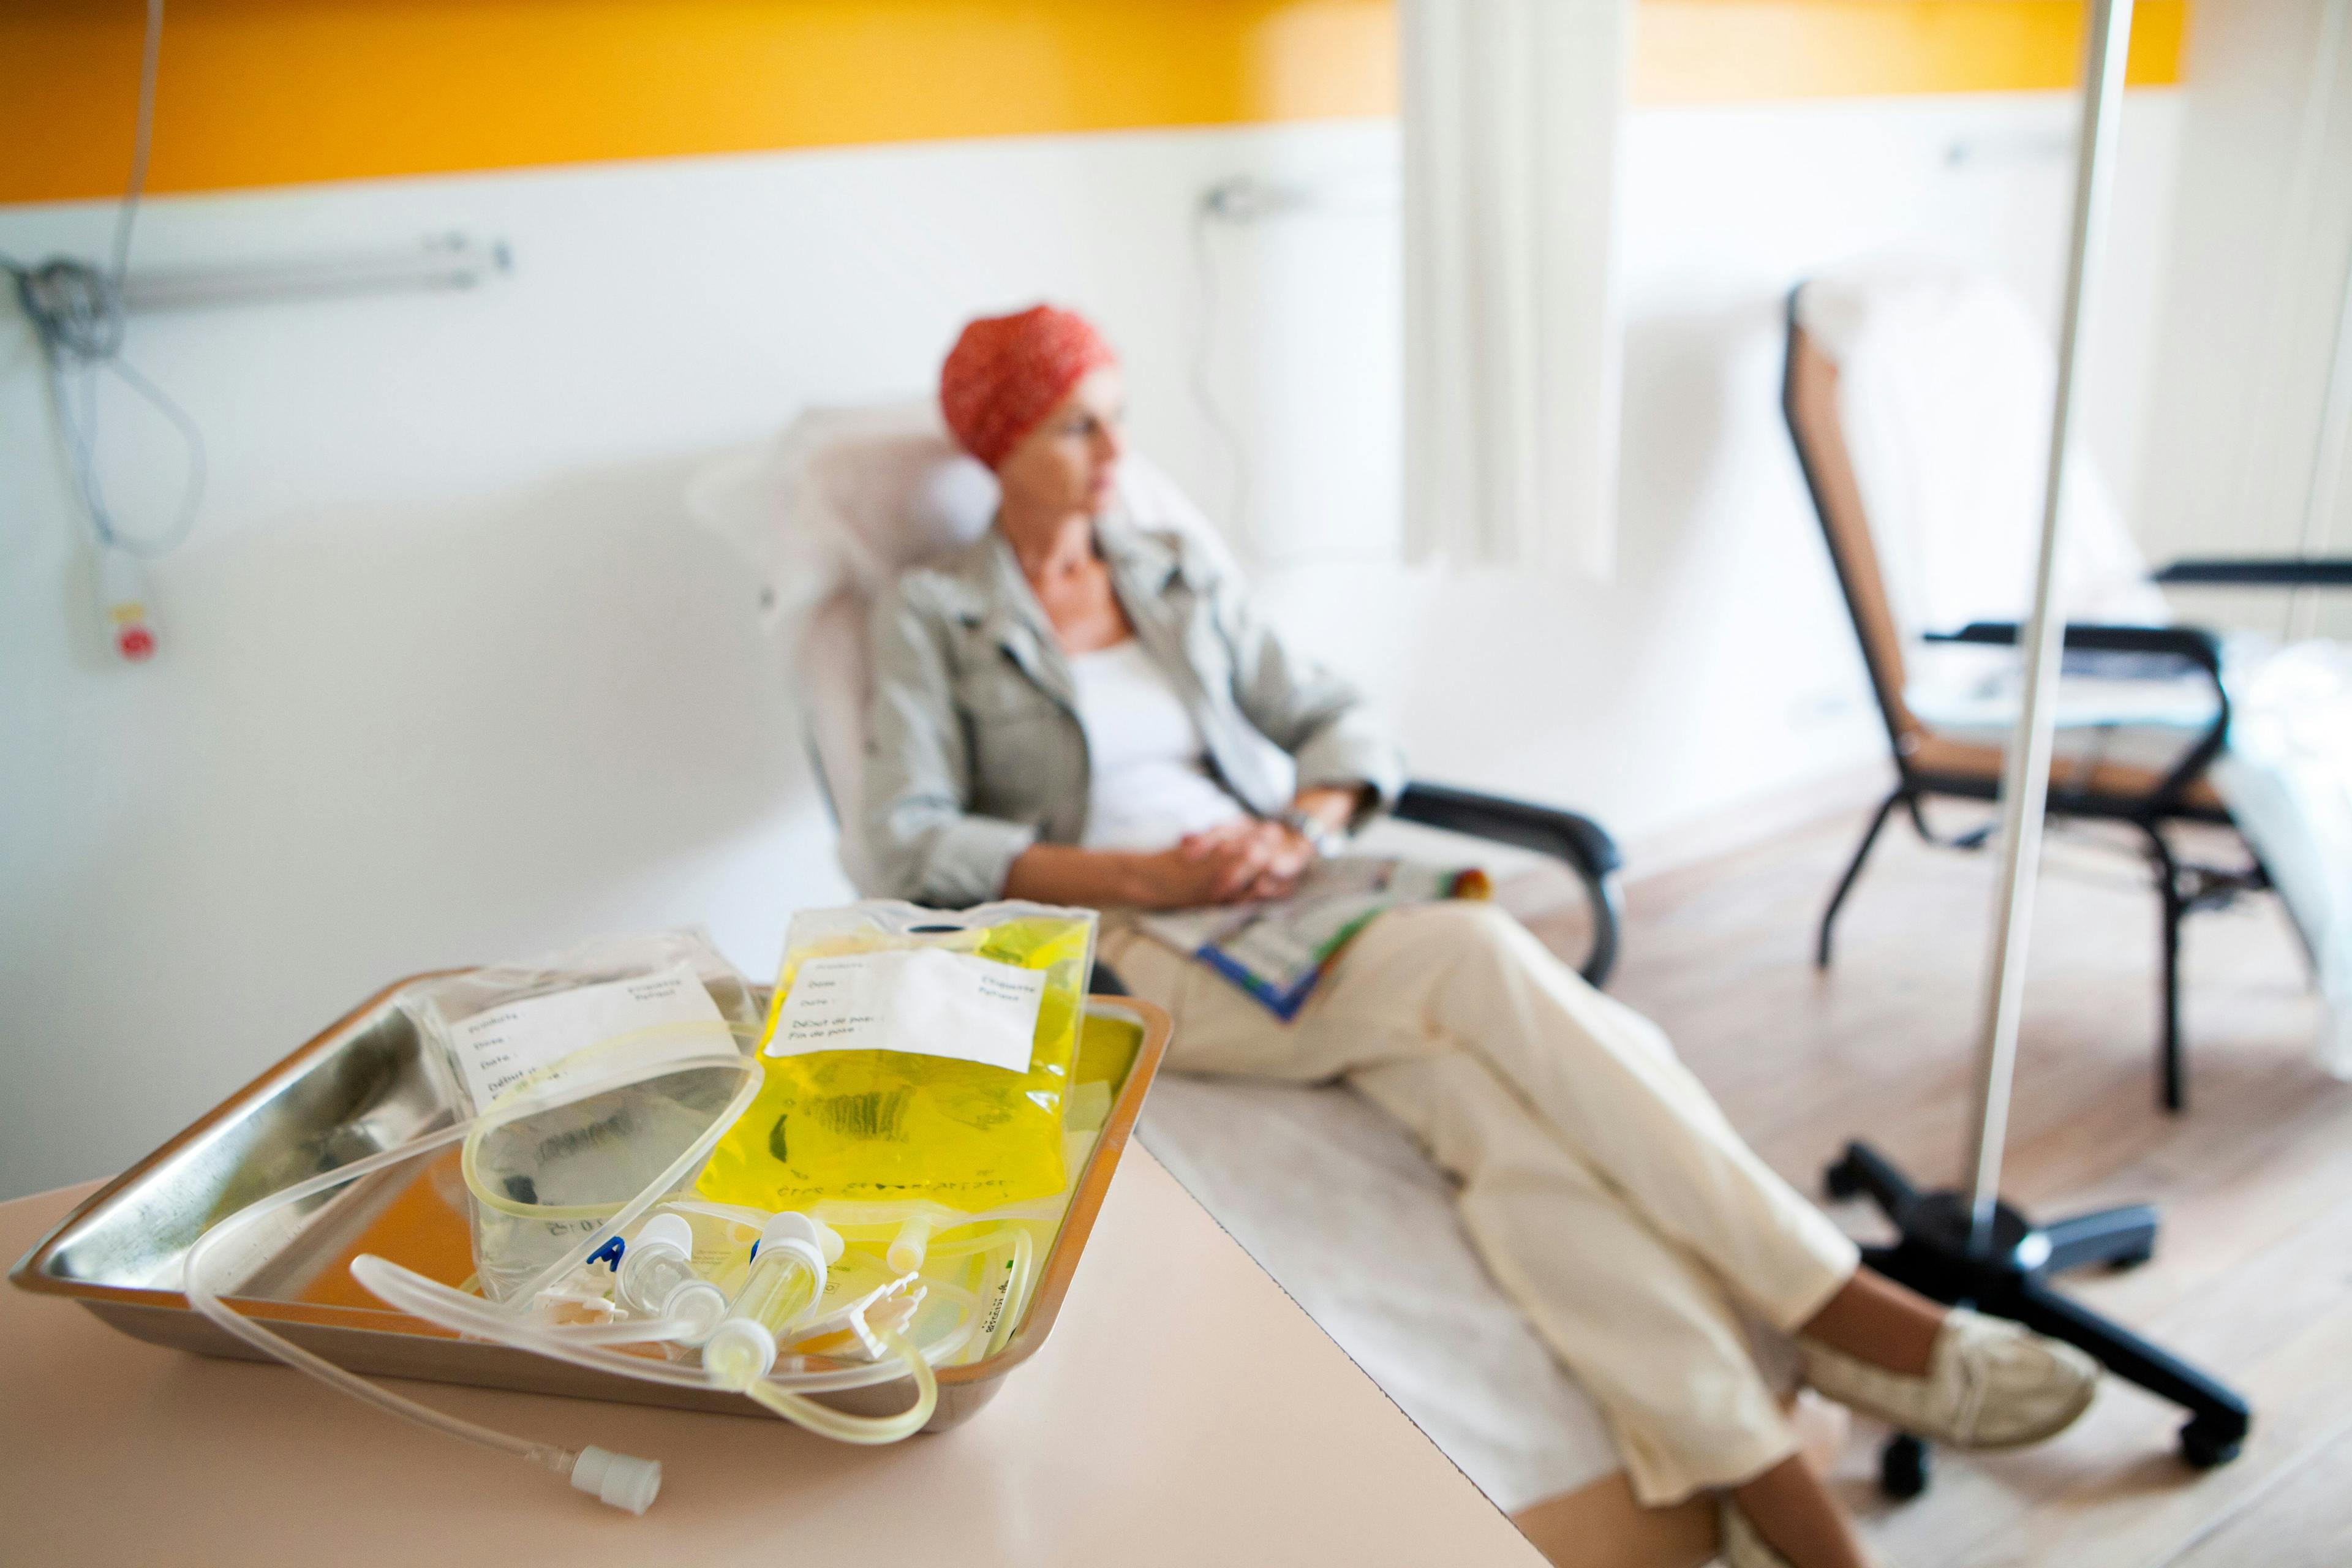 Person receiving cancer treatemnt | Image credit: RFBSIP - stock.adobe.com